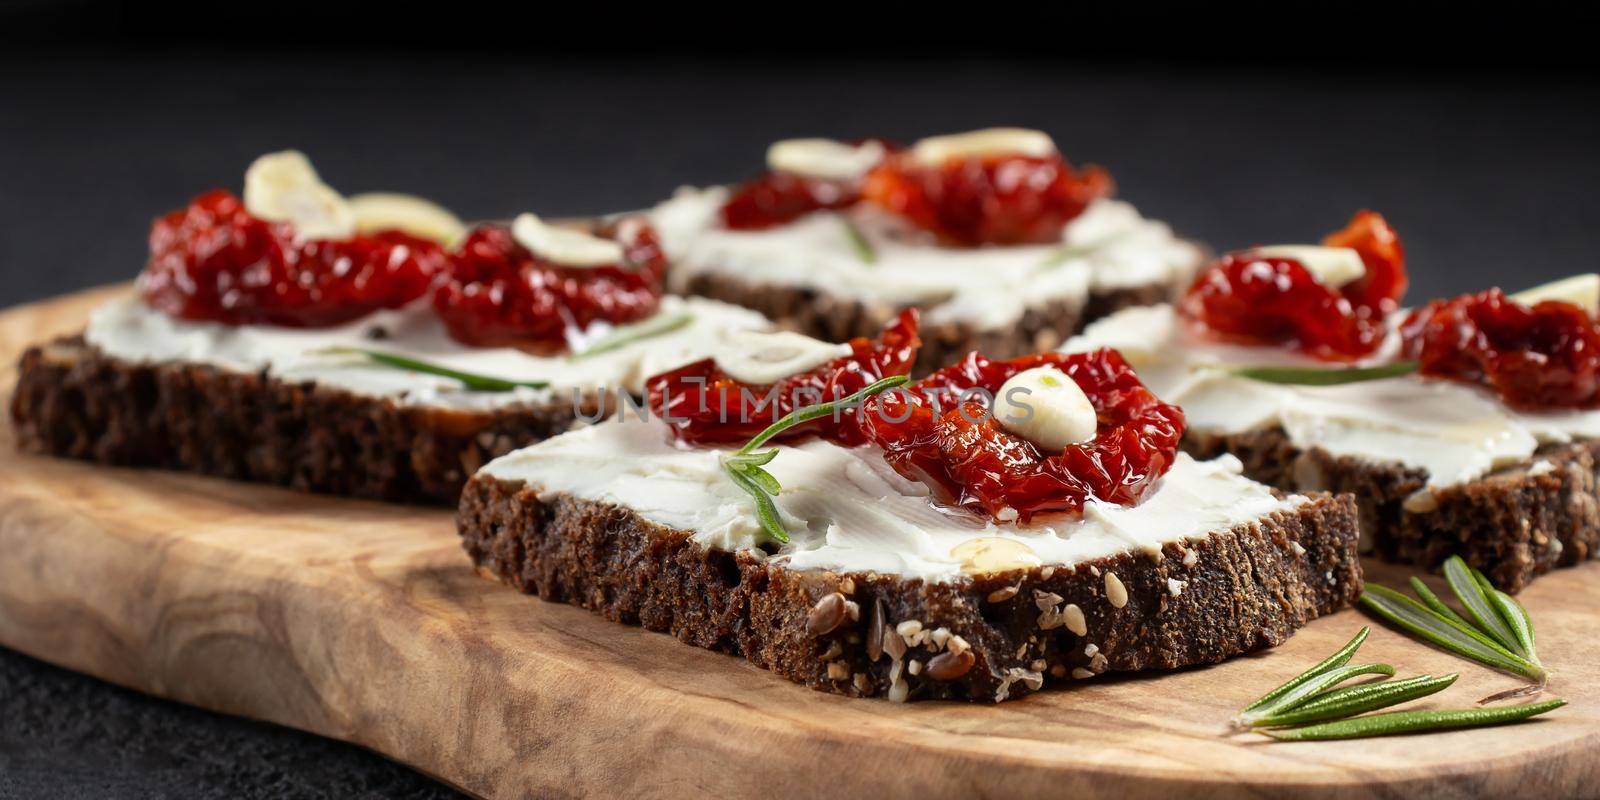 Homemade multigrain bread sandwiches with cream cheese and sun-dried tomatoes on a wooden platter. Healthy eating concept.